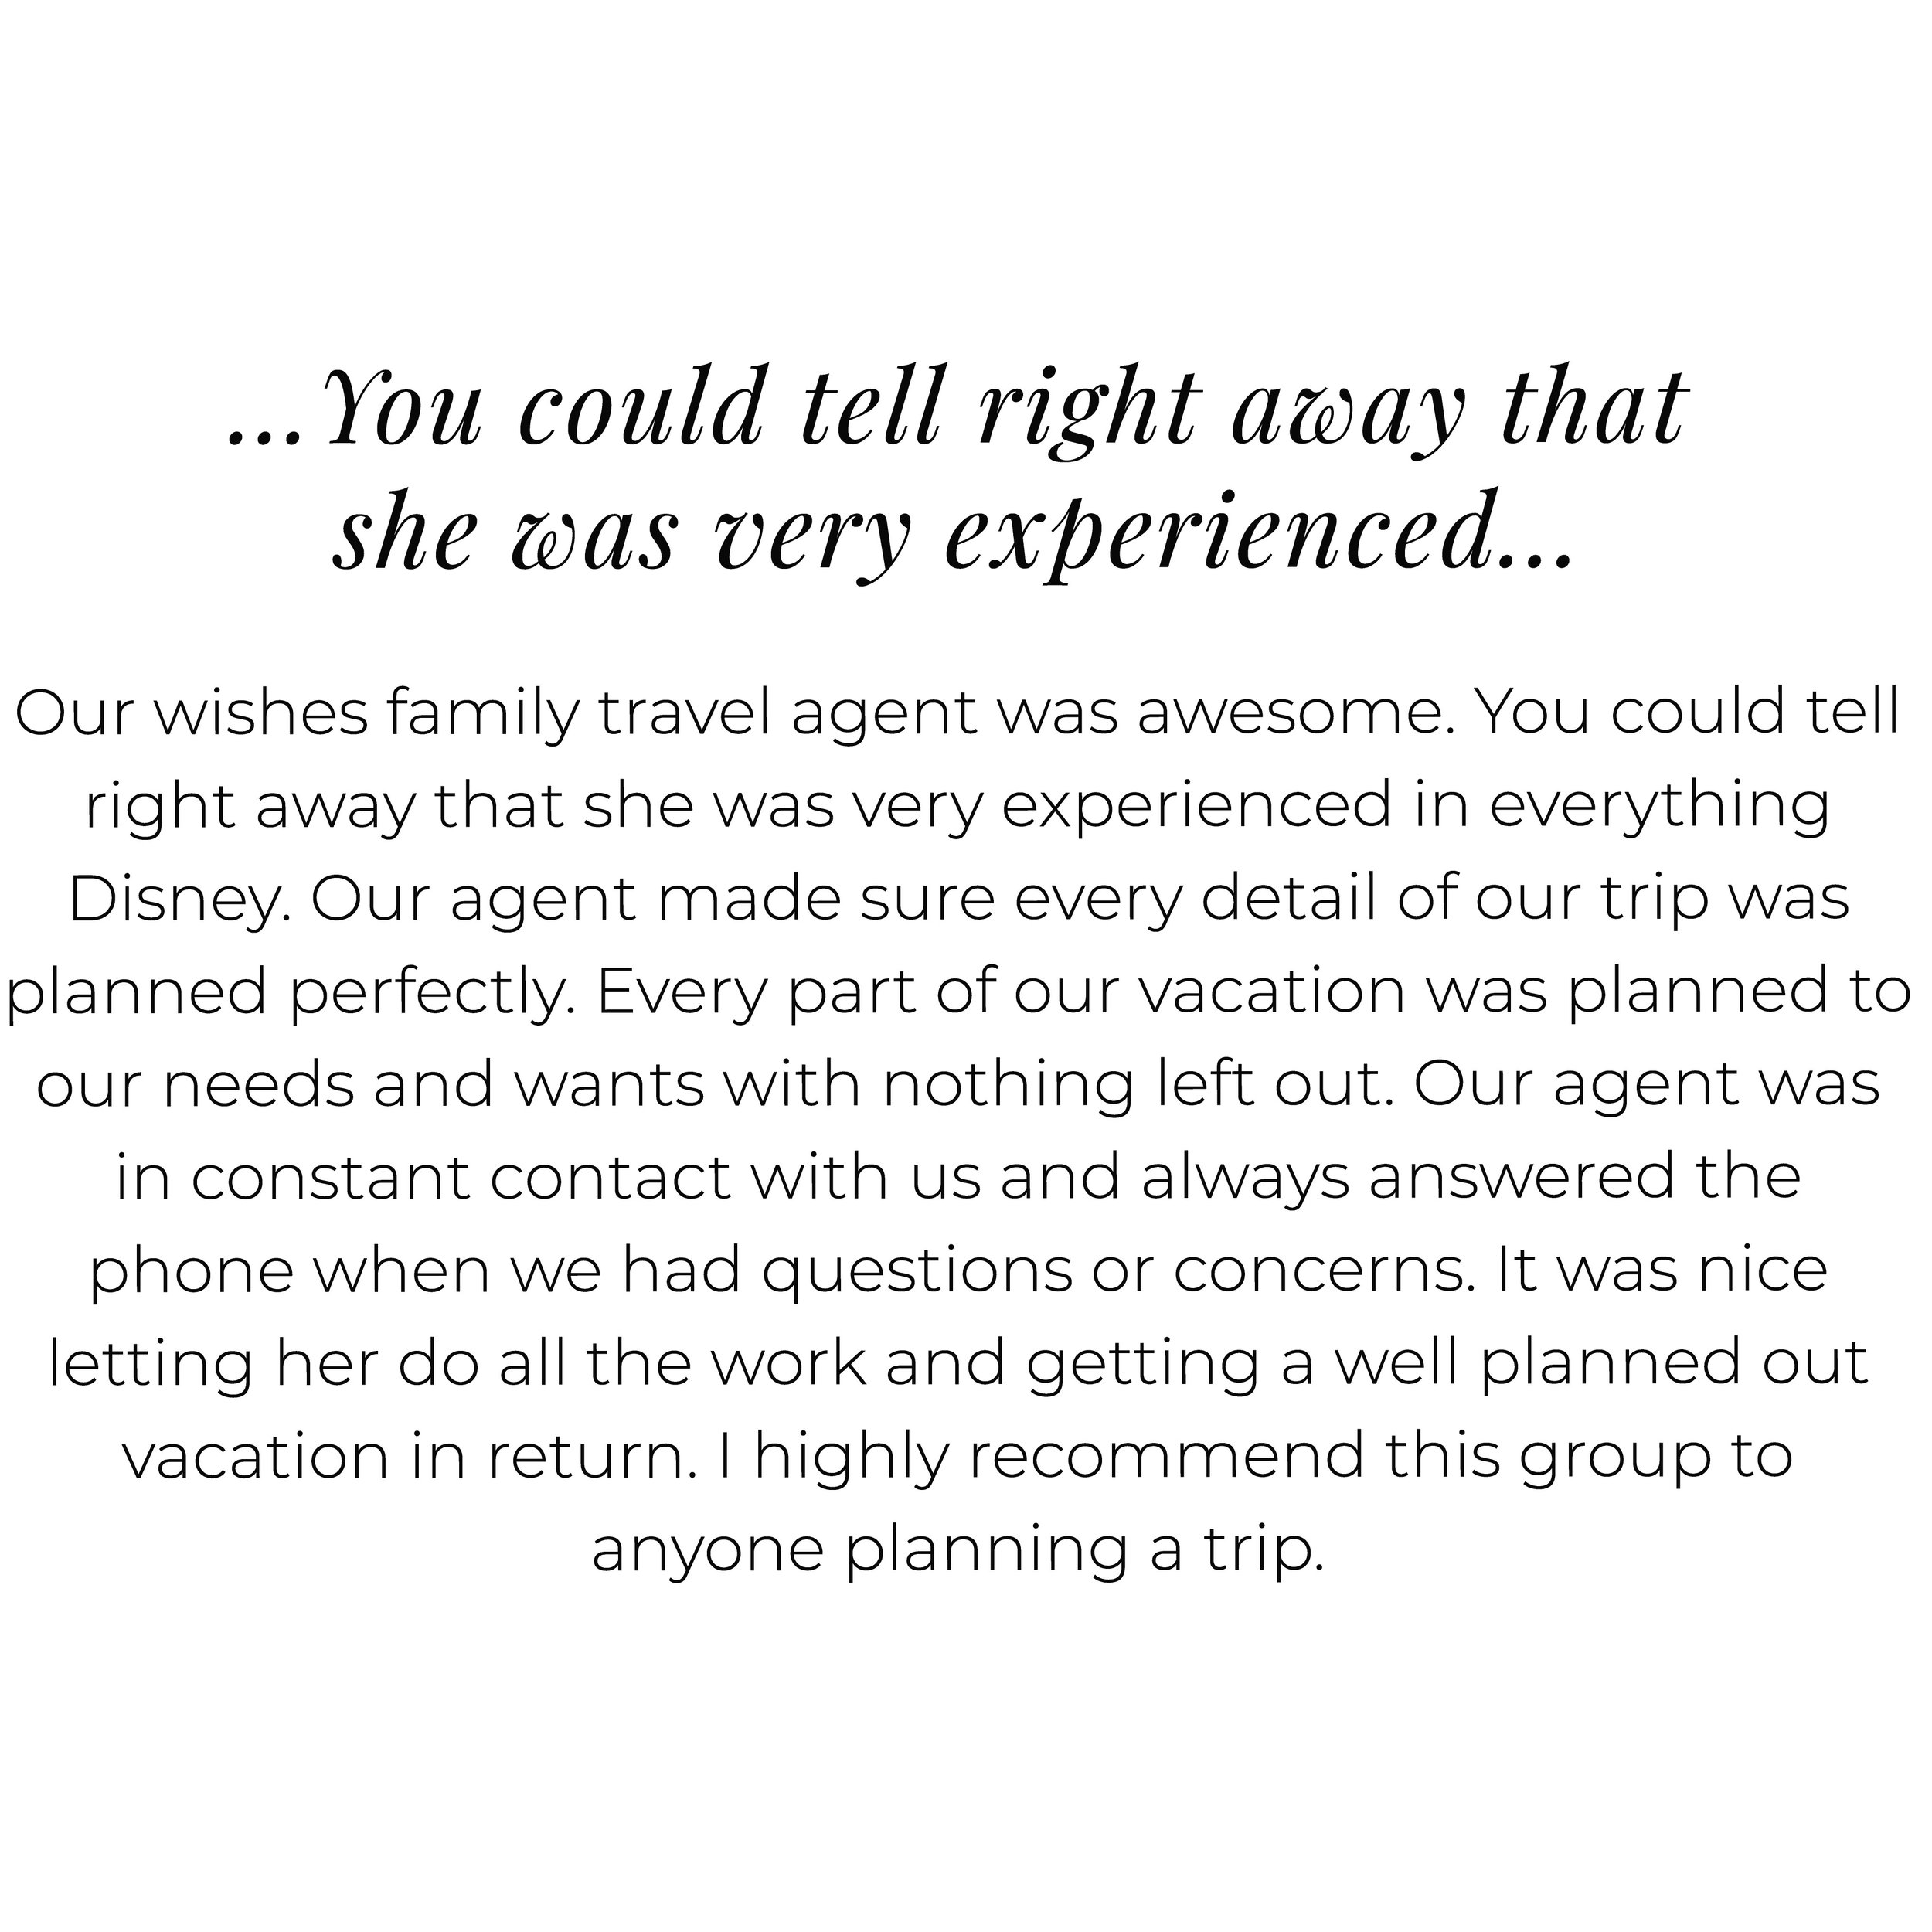 Wishes_Testimonials_mobile_0009s_0000_…You could tell right away that she was very experienced… Our w.jpg